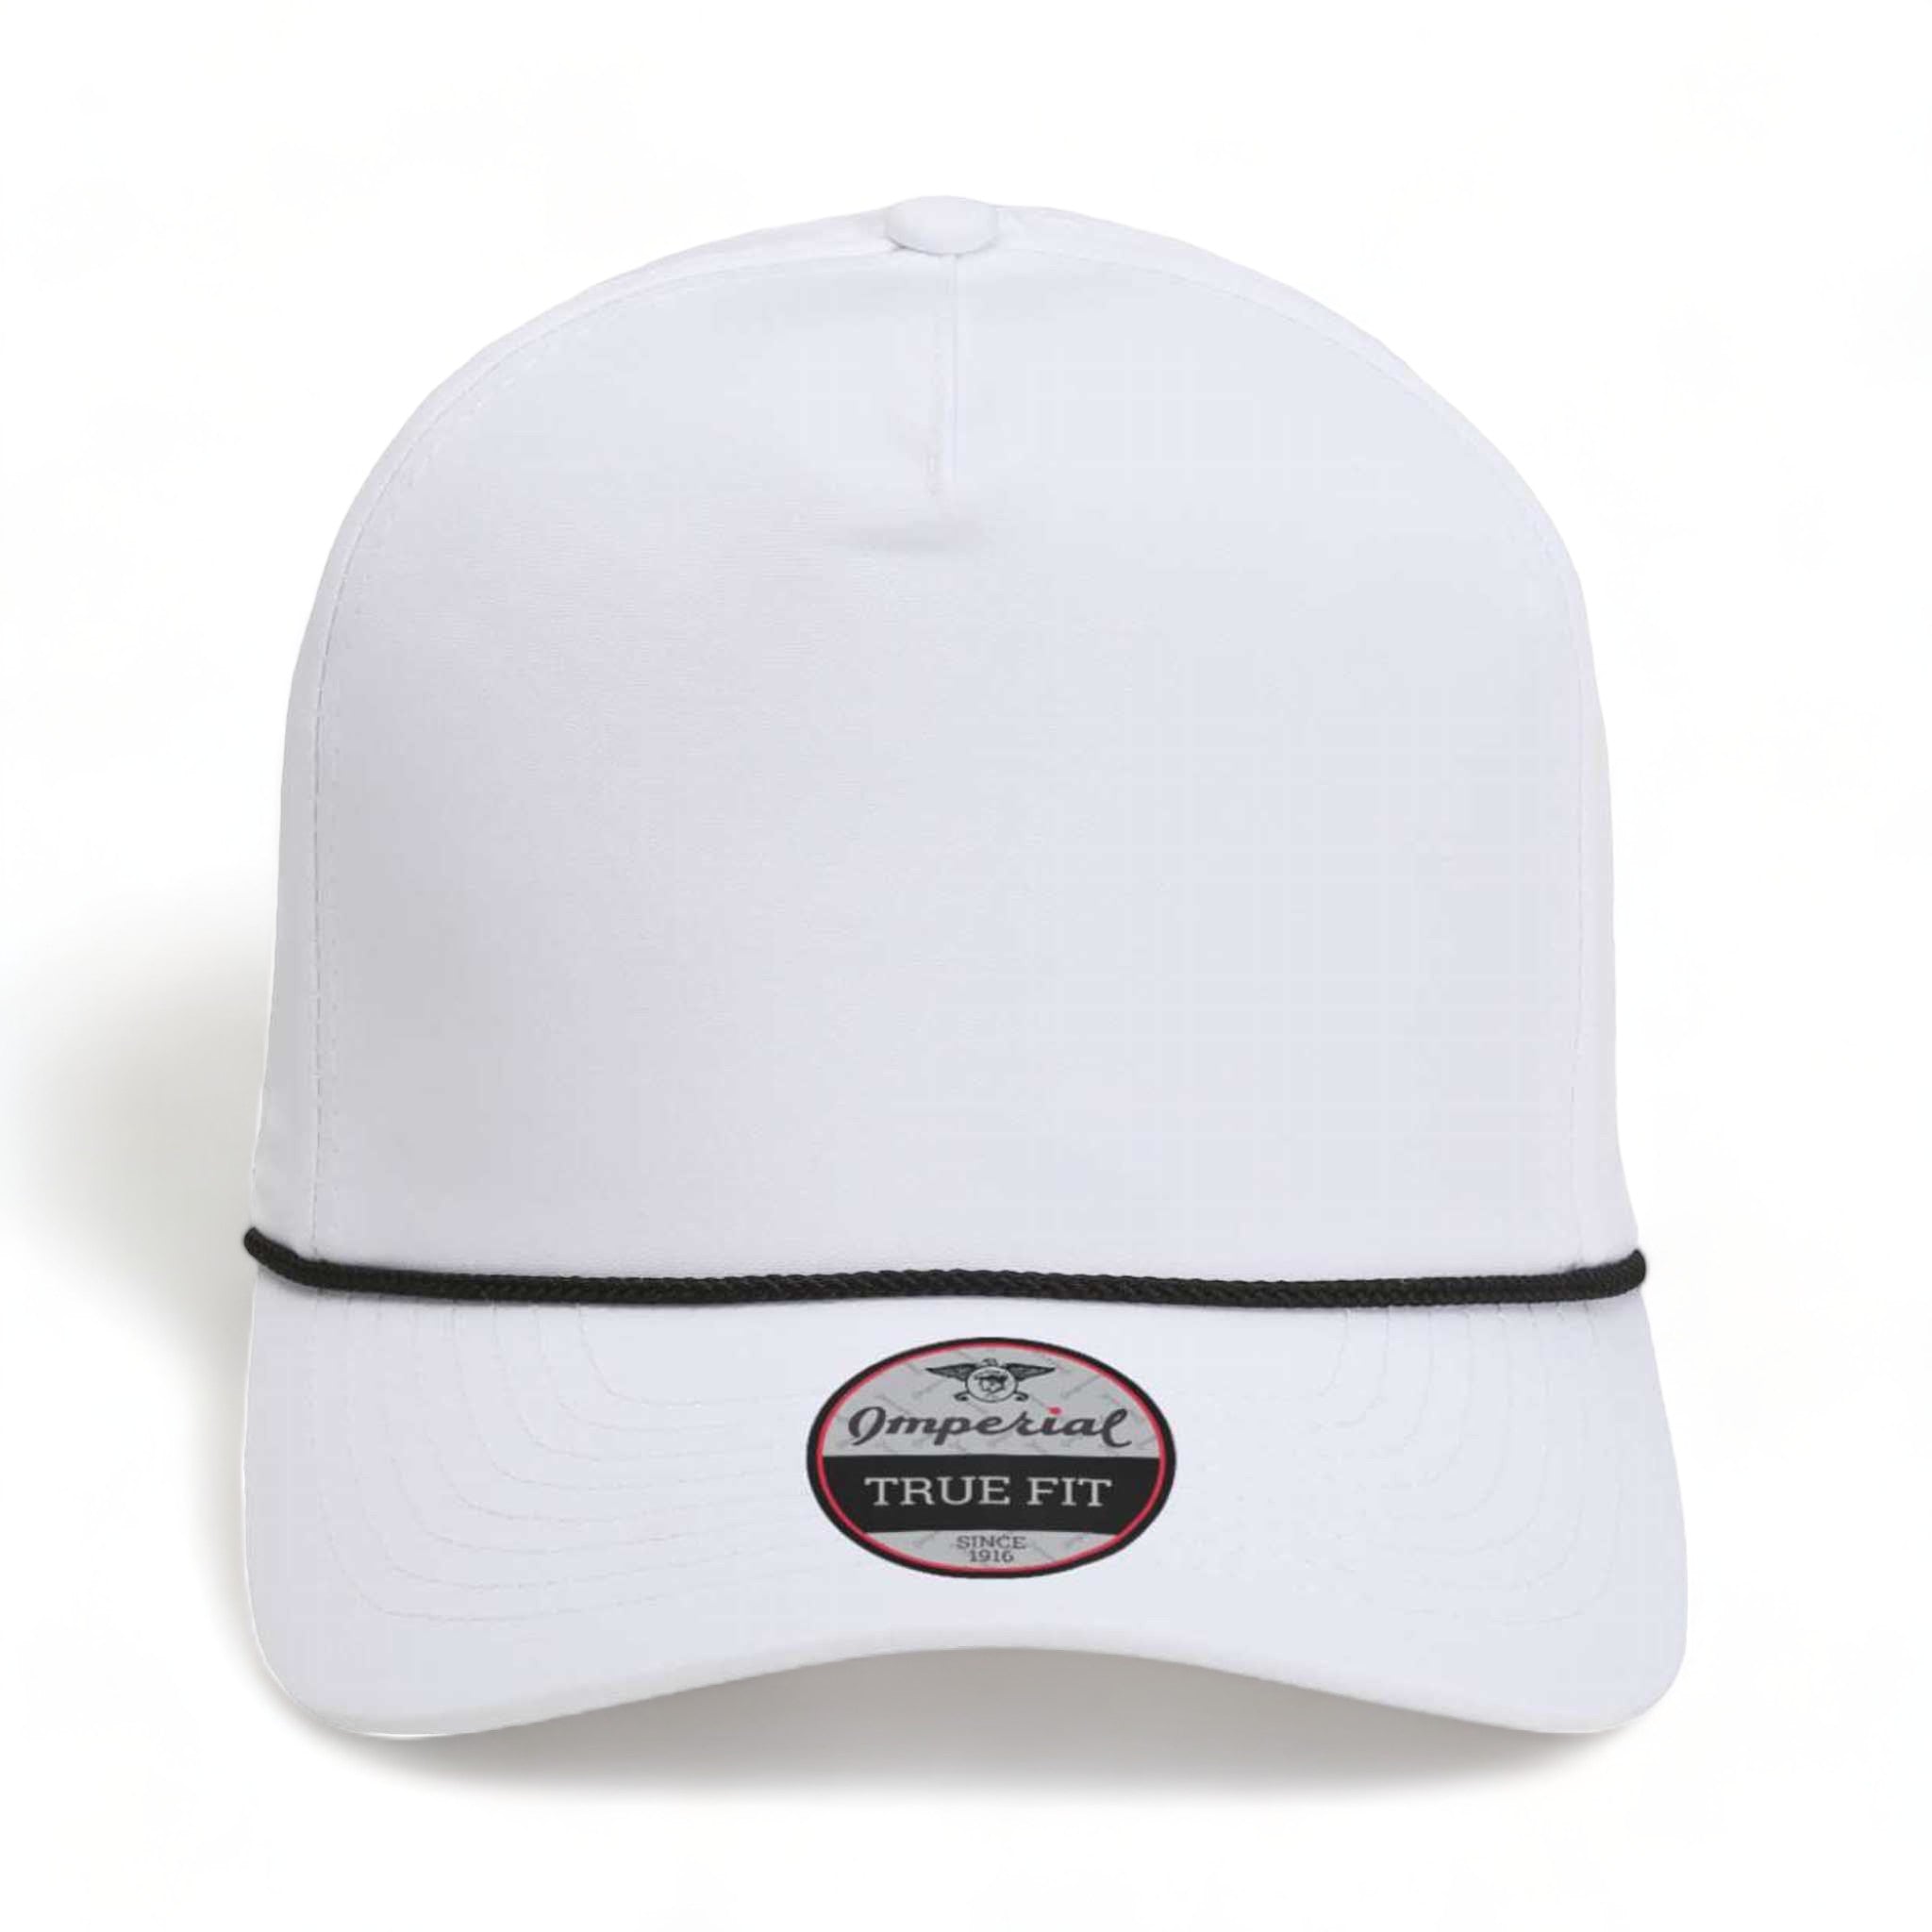 Front view of Imperial 5054 custom hat in white and black